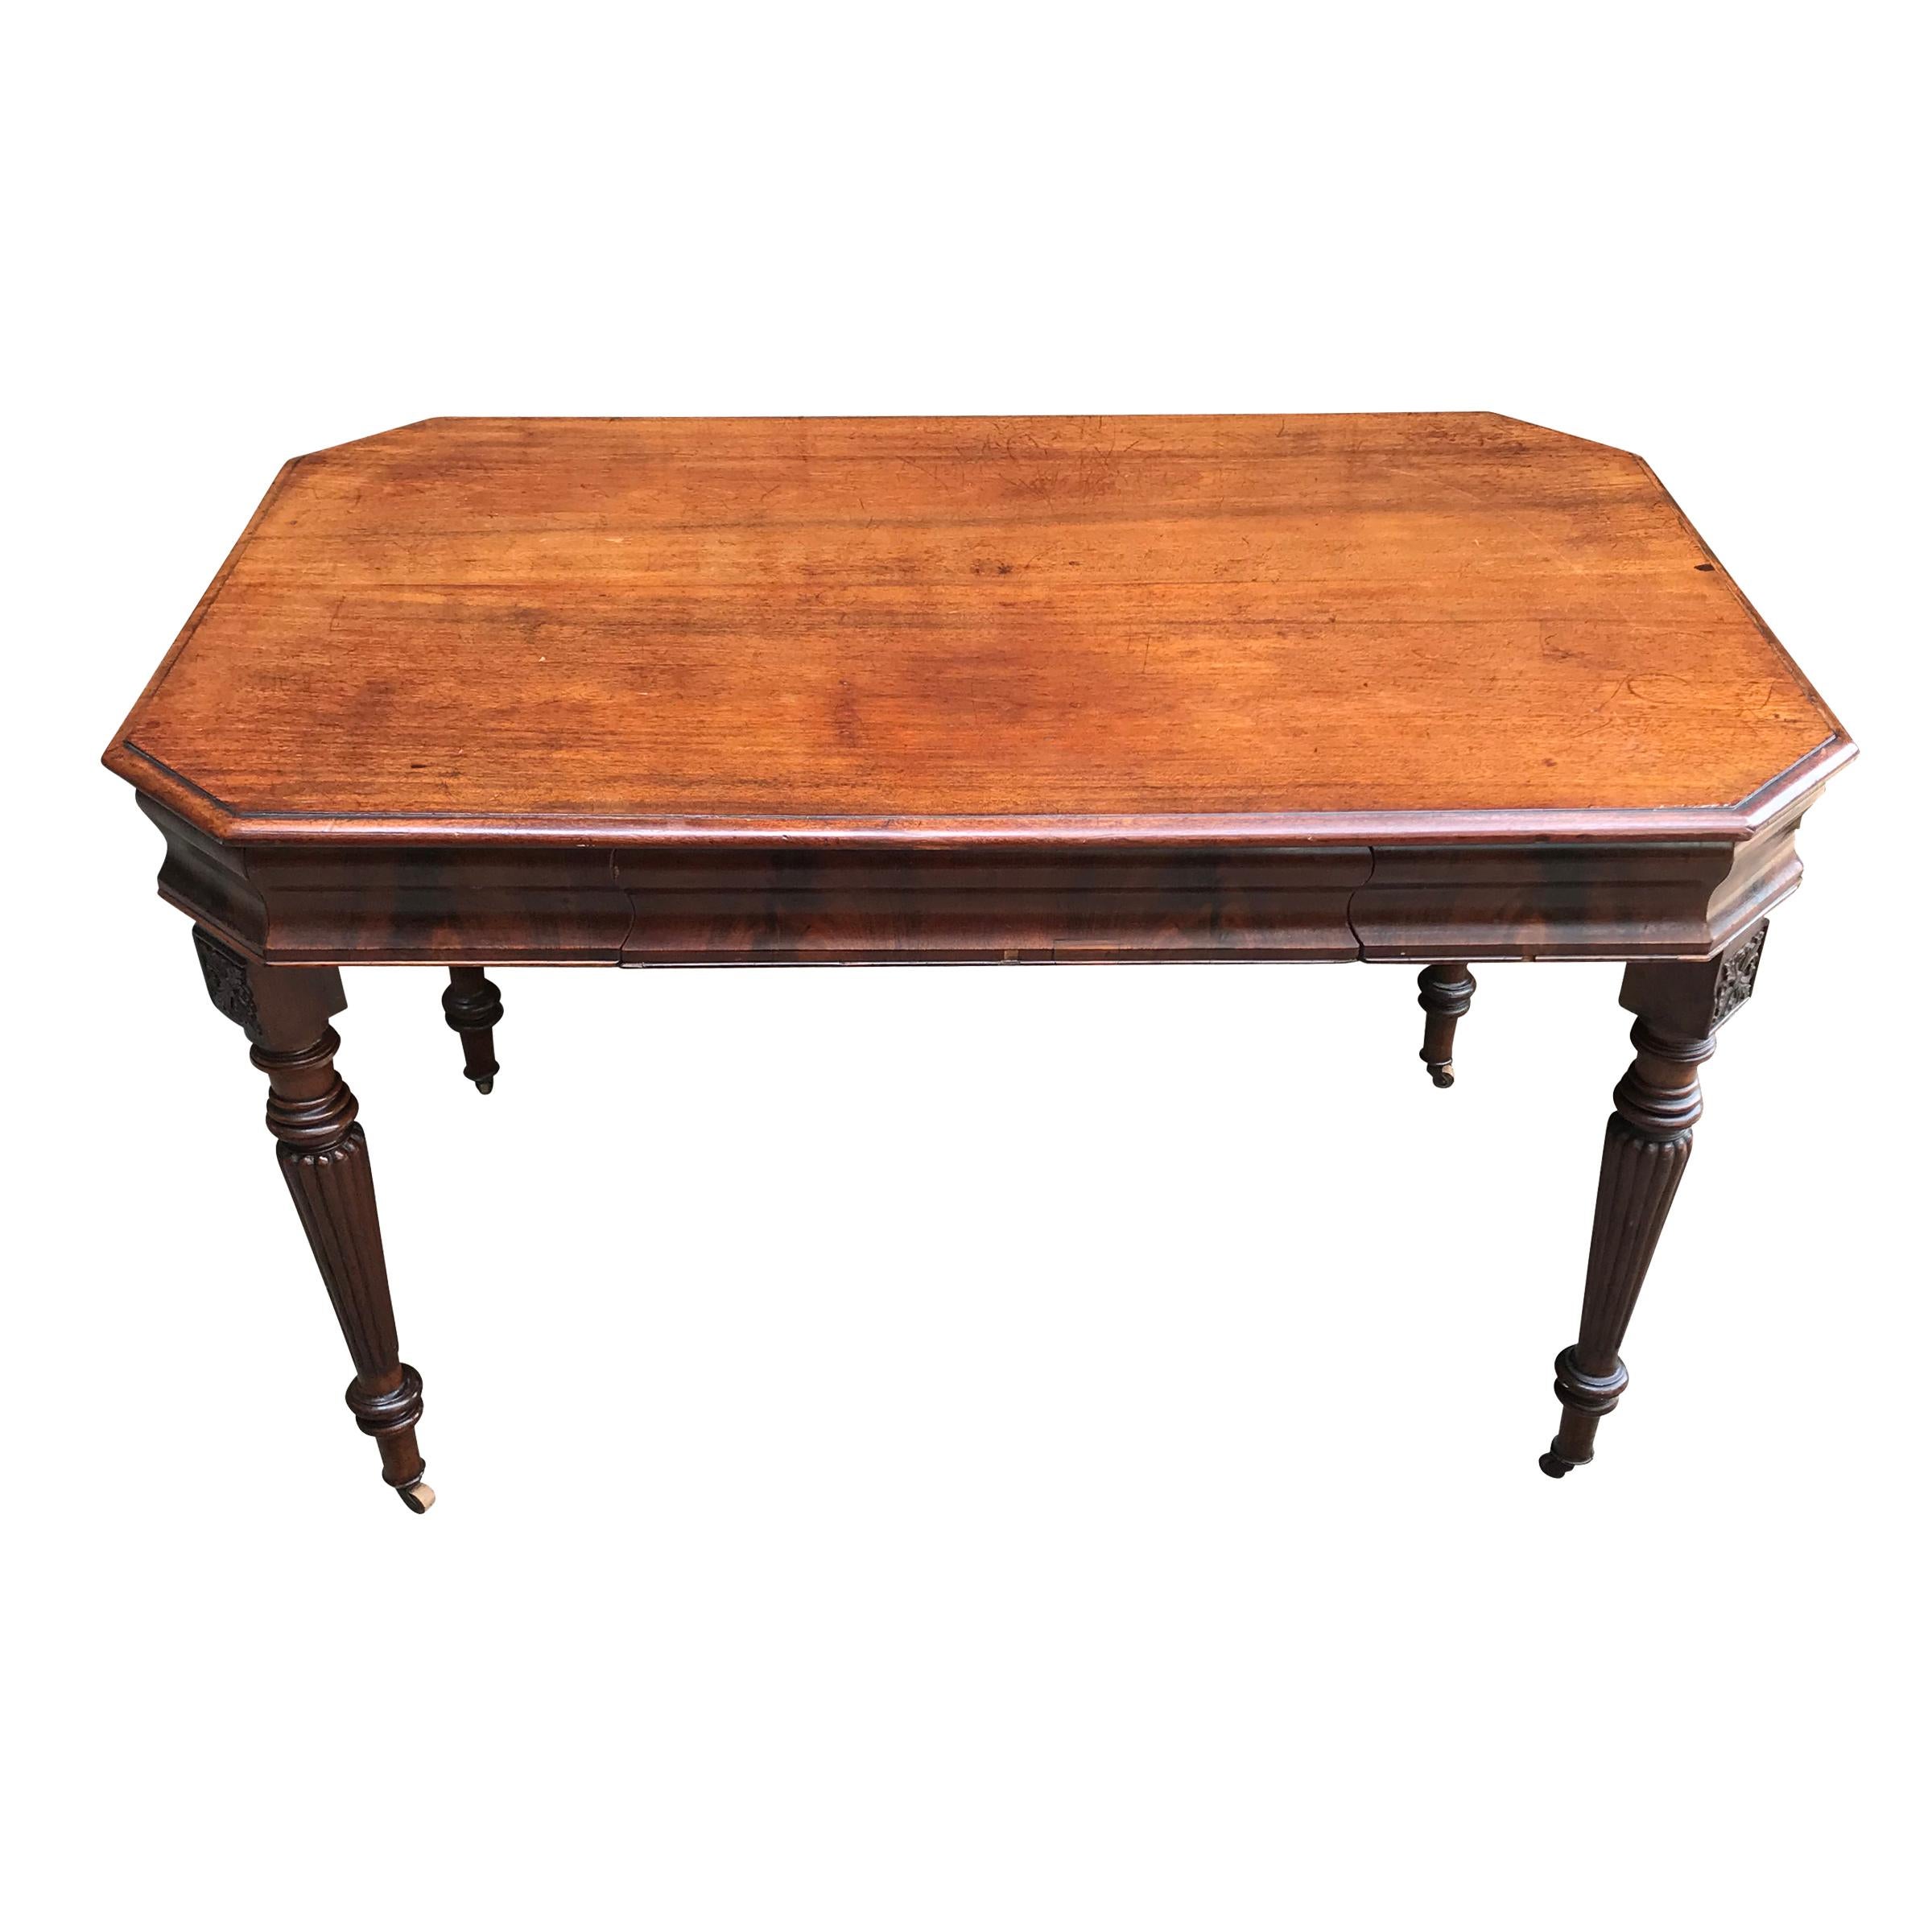 A 19th century English early Victorian period mahogany writing table or desk with a hexagonal top composed of two wide mahogany planks with a simple rounded edge detail. The apron is flame mahogany veneer, with one large drawer in the center. The